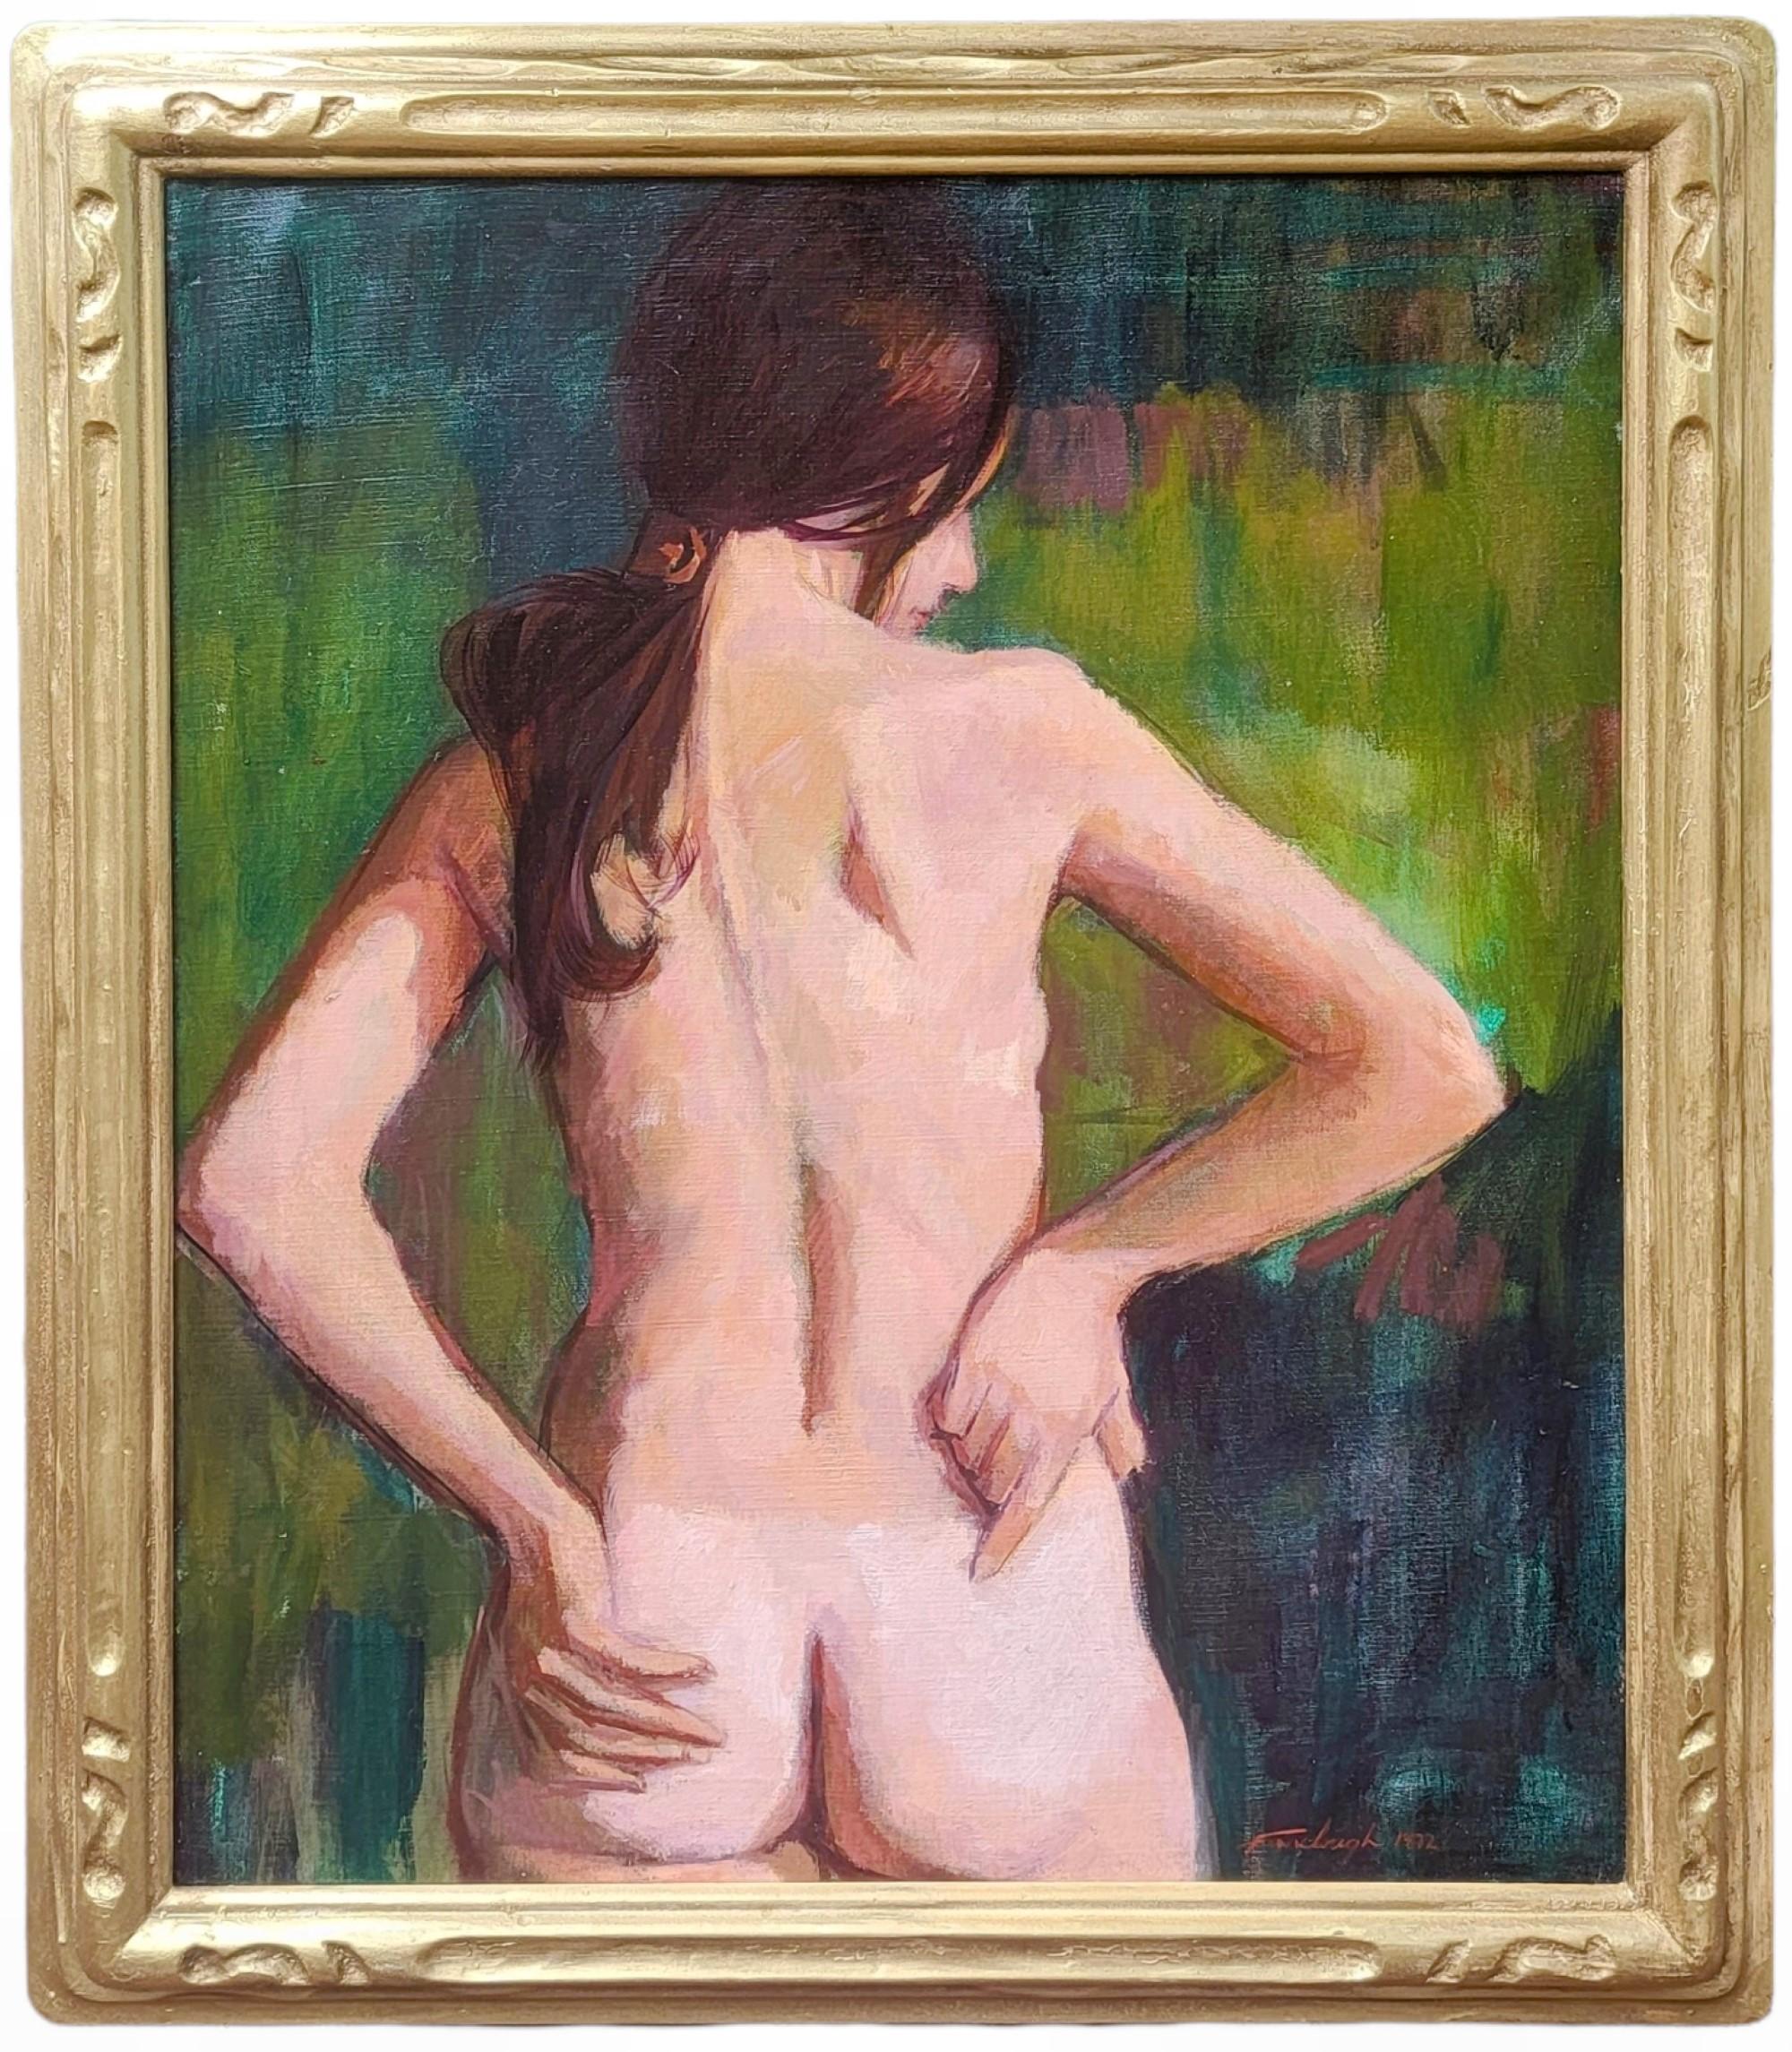 Gerald Fairclough (American, Born 1946)

Signed: Fairclough 1972 (Lower, Right)

" Nude ", 1972

Oil on Canvas 

24" x 20"

Housed in a 2 1/4" Frame

Overall Size: 28" x 24"

Small repair to canvas, see repair on verso. In otherwise very good